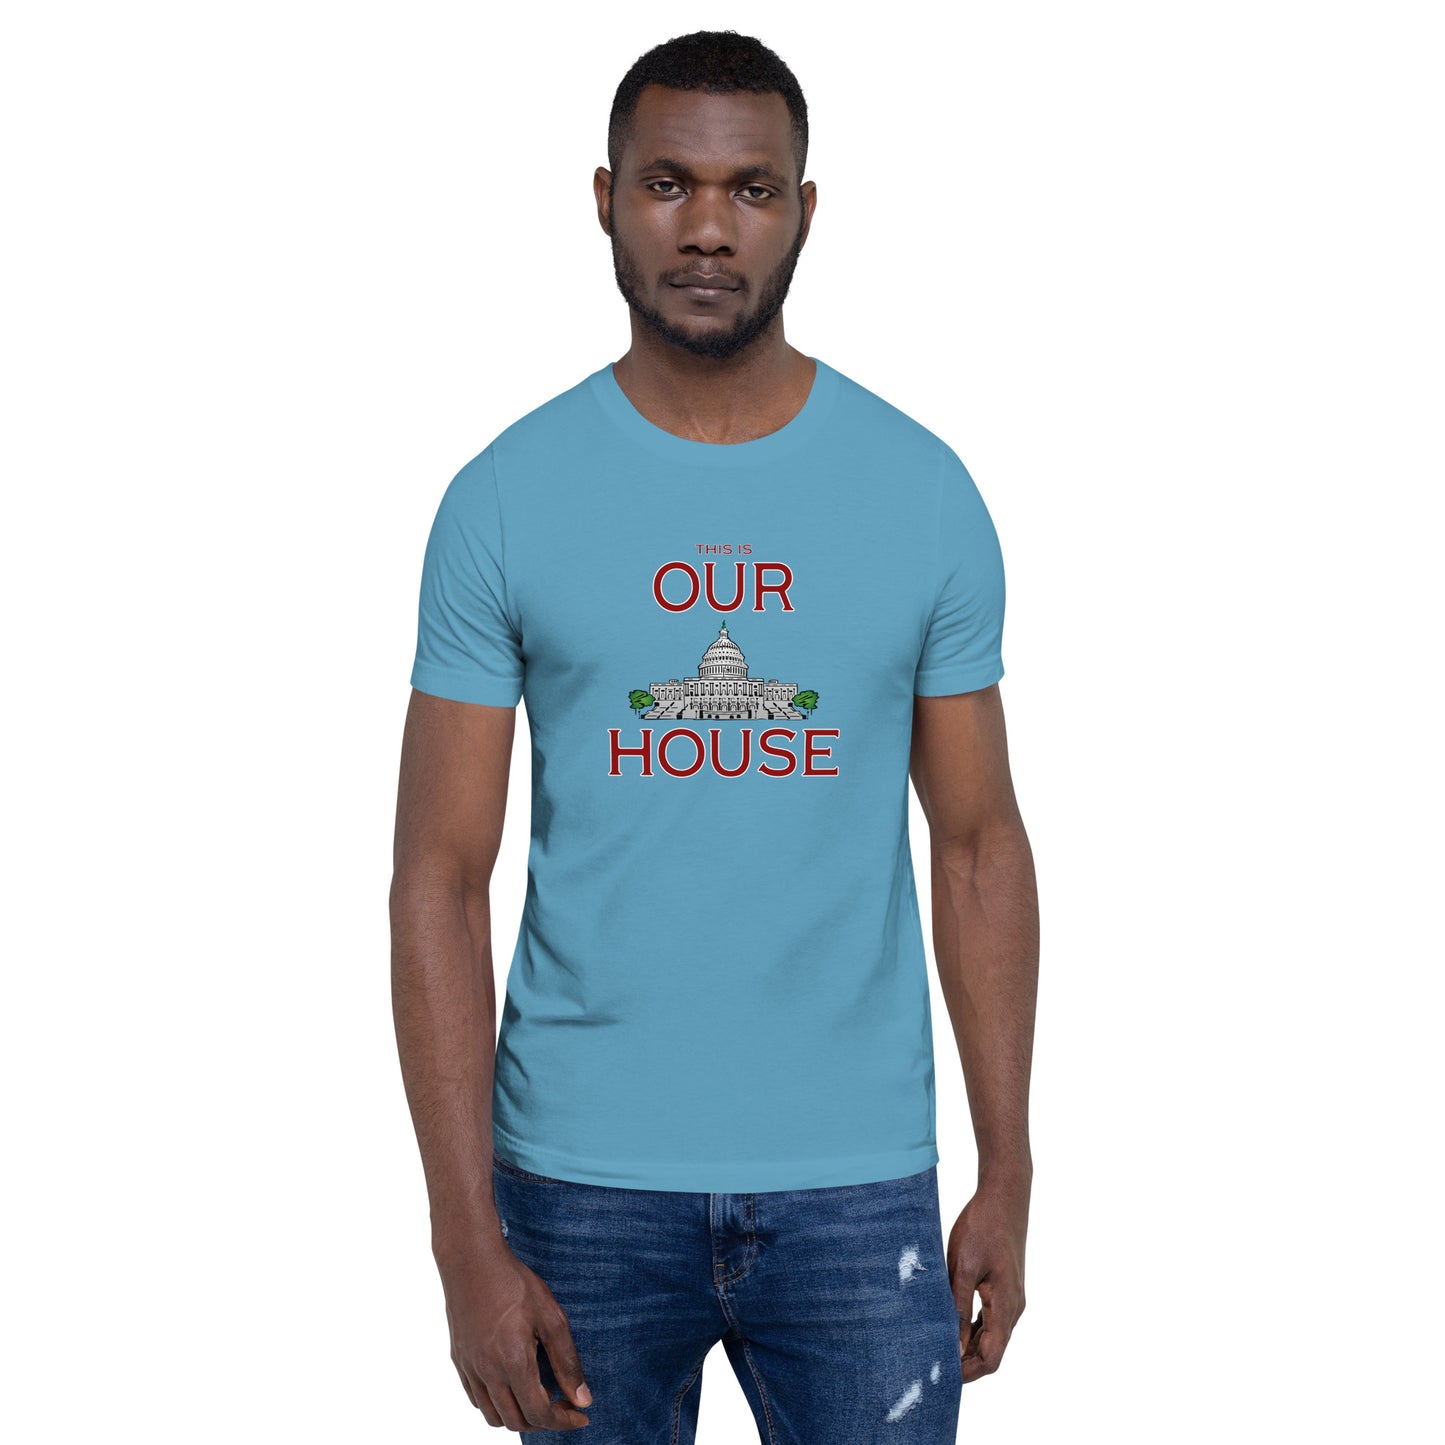 Our House T-shirt